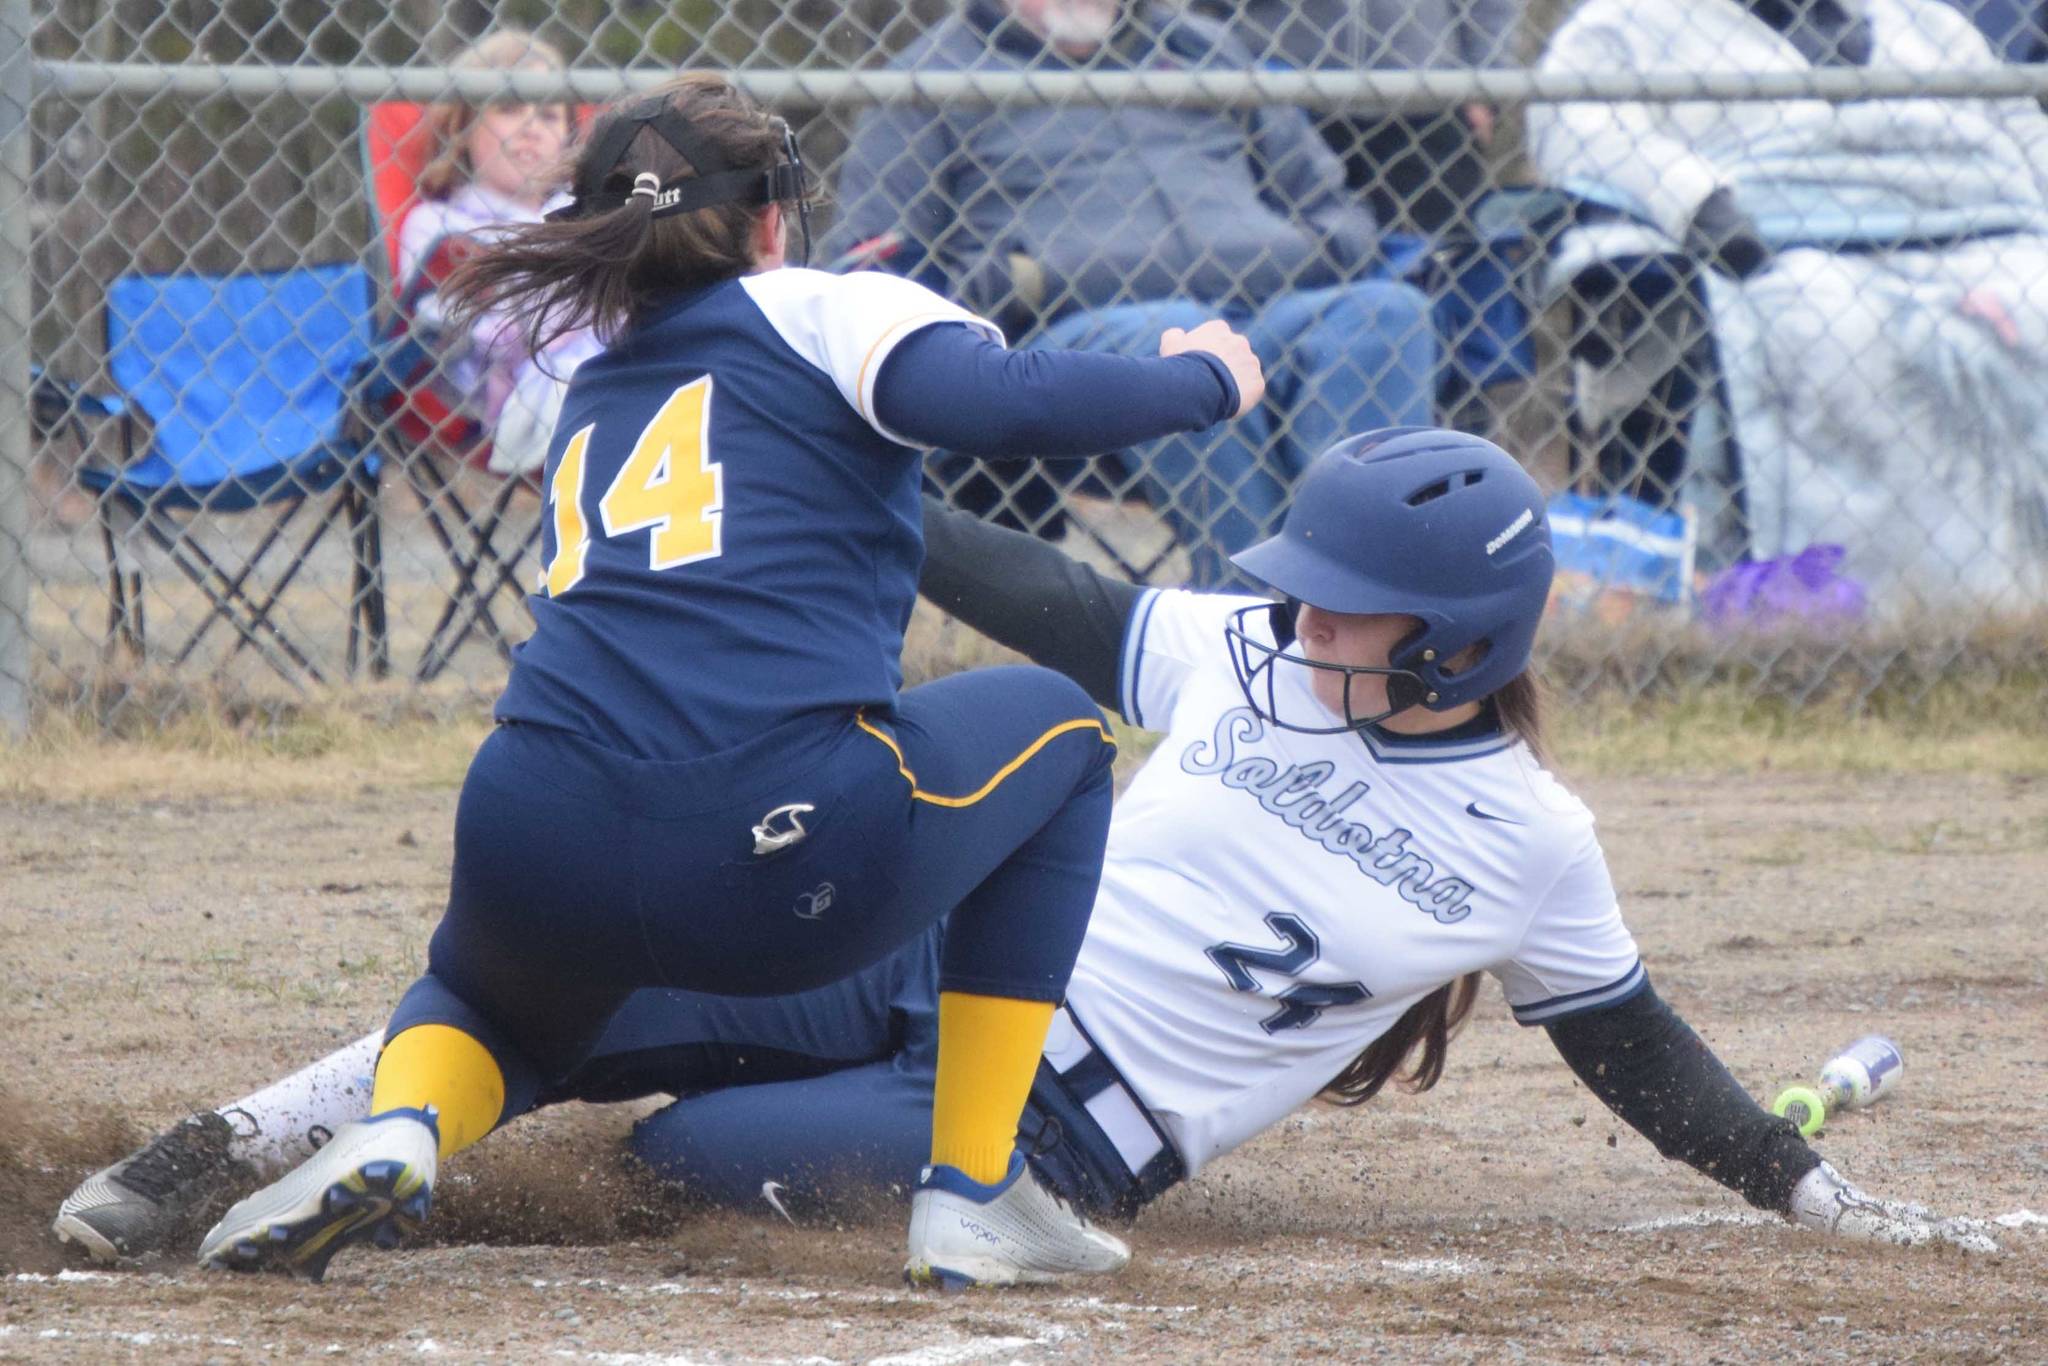 Soldotna's Lexi Stormo slides under the tag of Homer pitcher Zoe Adkins on Thursday, May 20, 2021, in Soldotna, Alaska. (Photo by Jeff Helminiak/Peninsula Clarion)